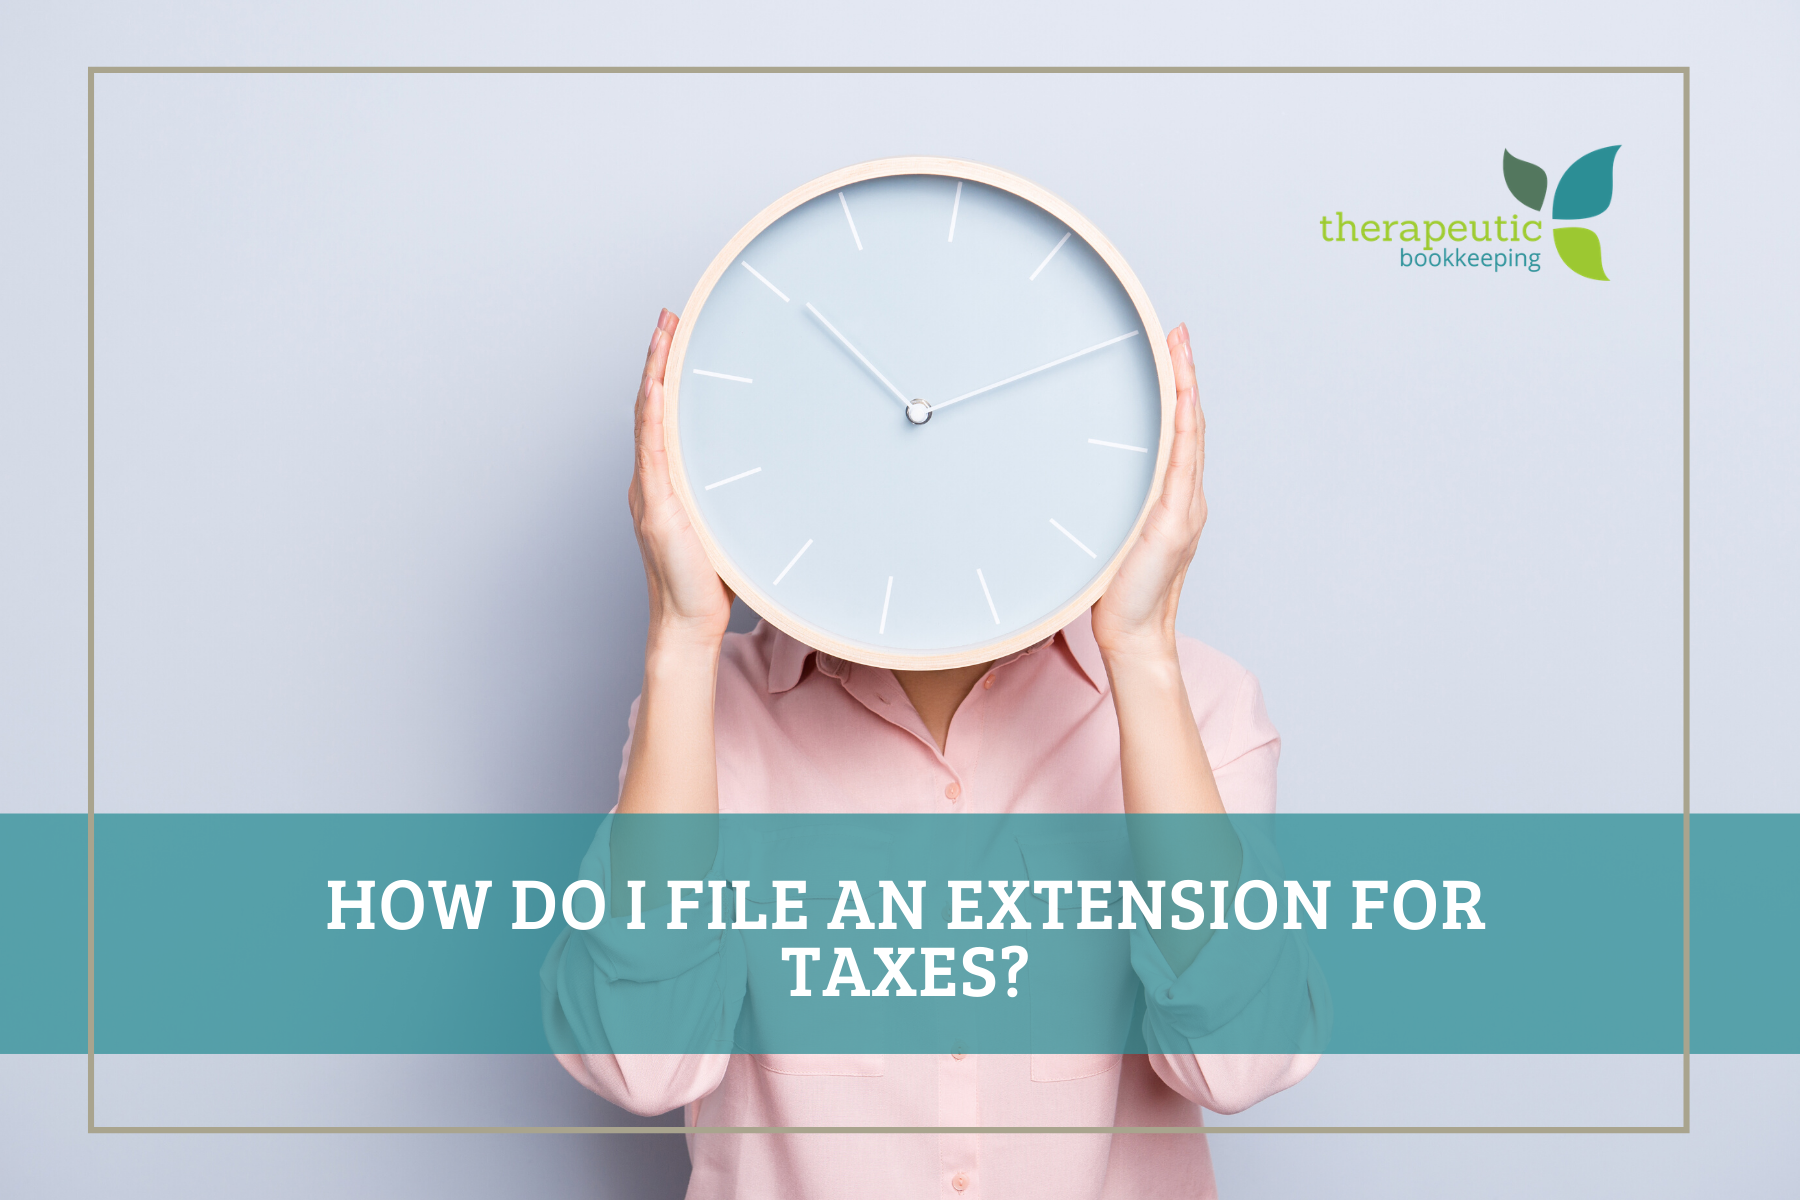 How do I file an extension for taxes?